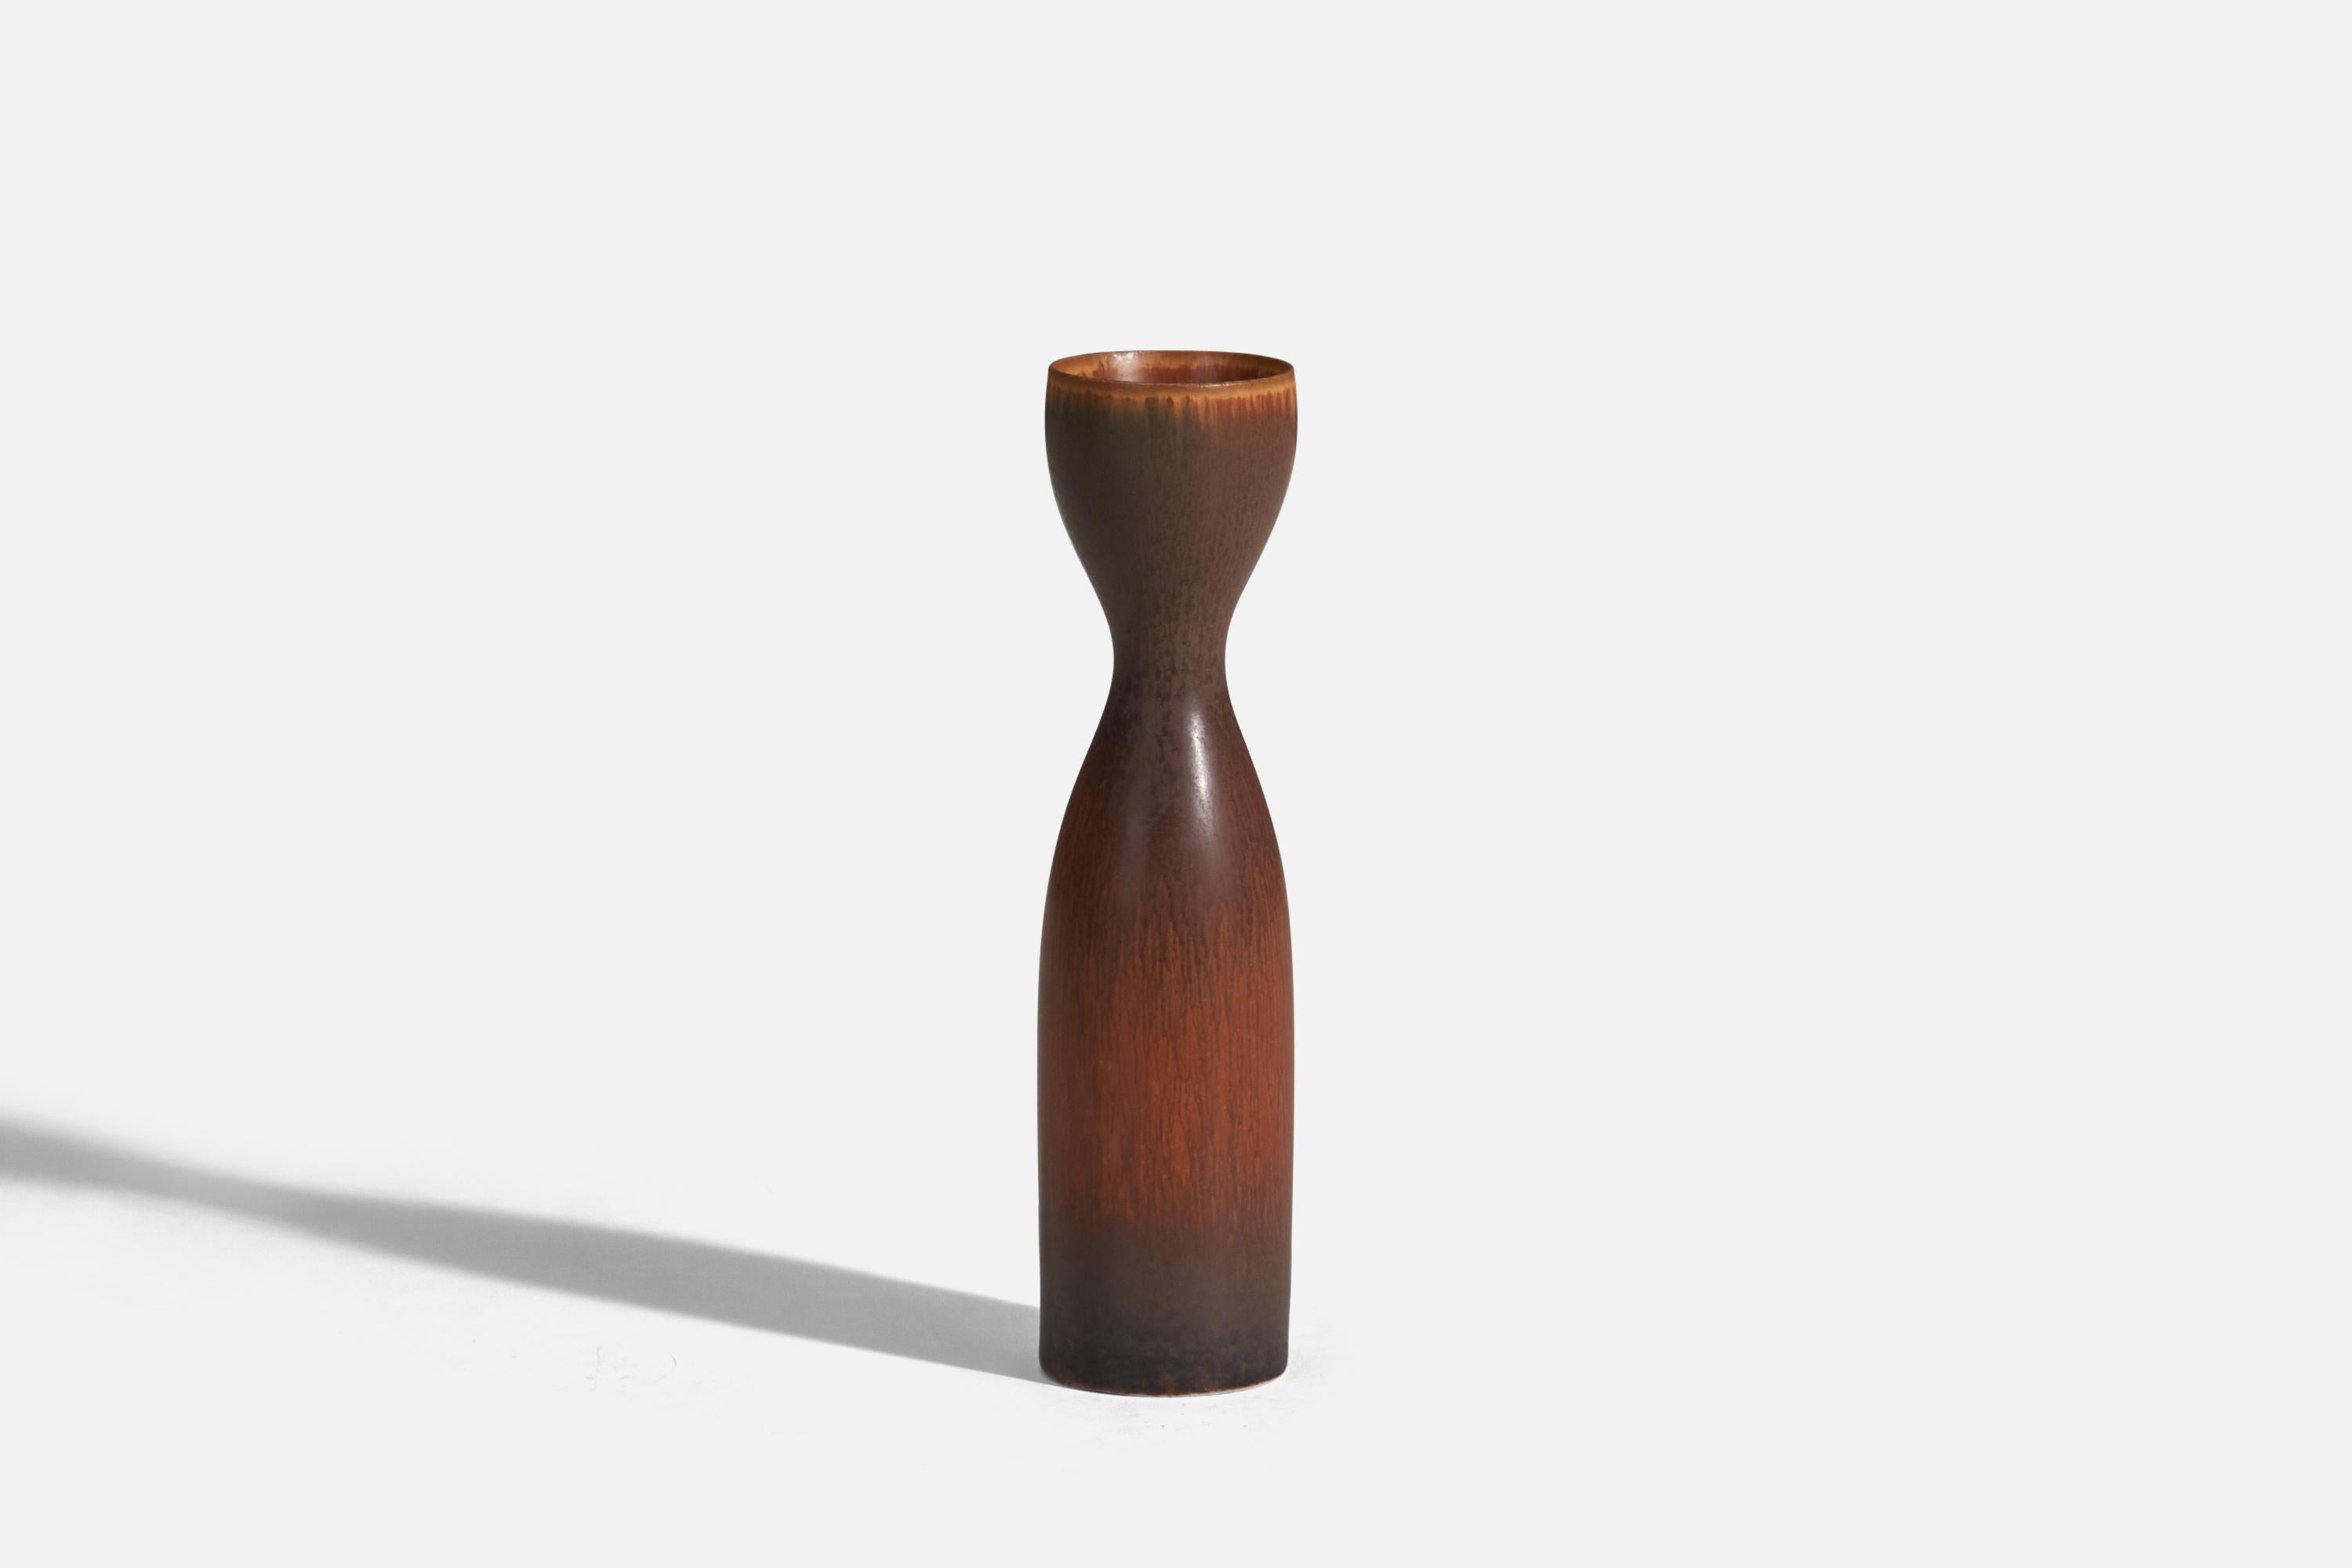 A brown glazed stoneware vase designed by Carl-Harry Stålhane and produced by Rörstrand, Sweden, 1960s.